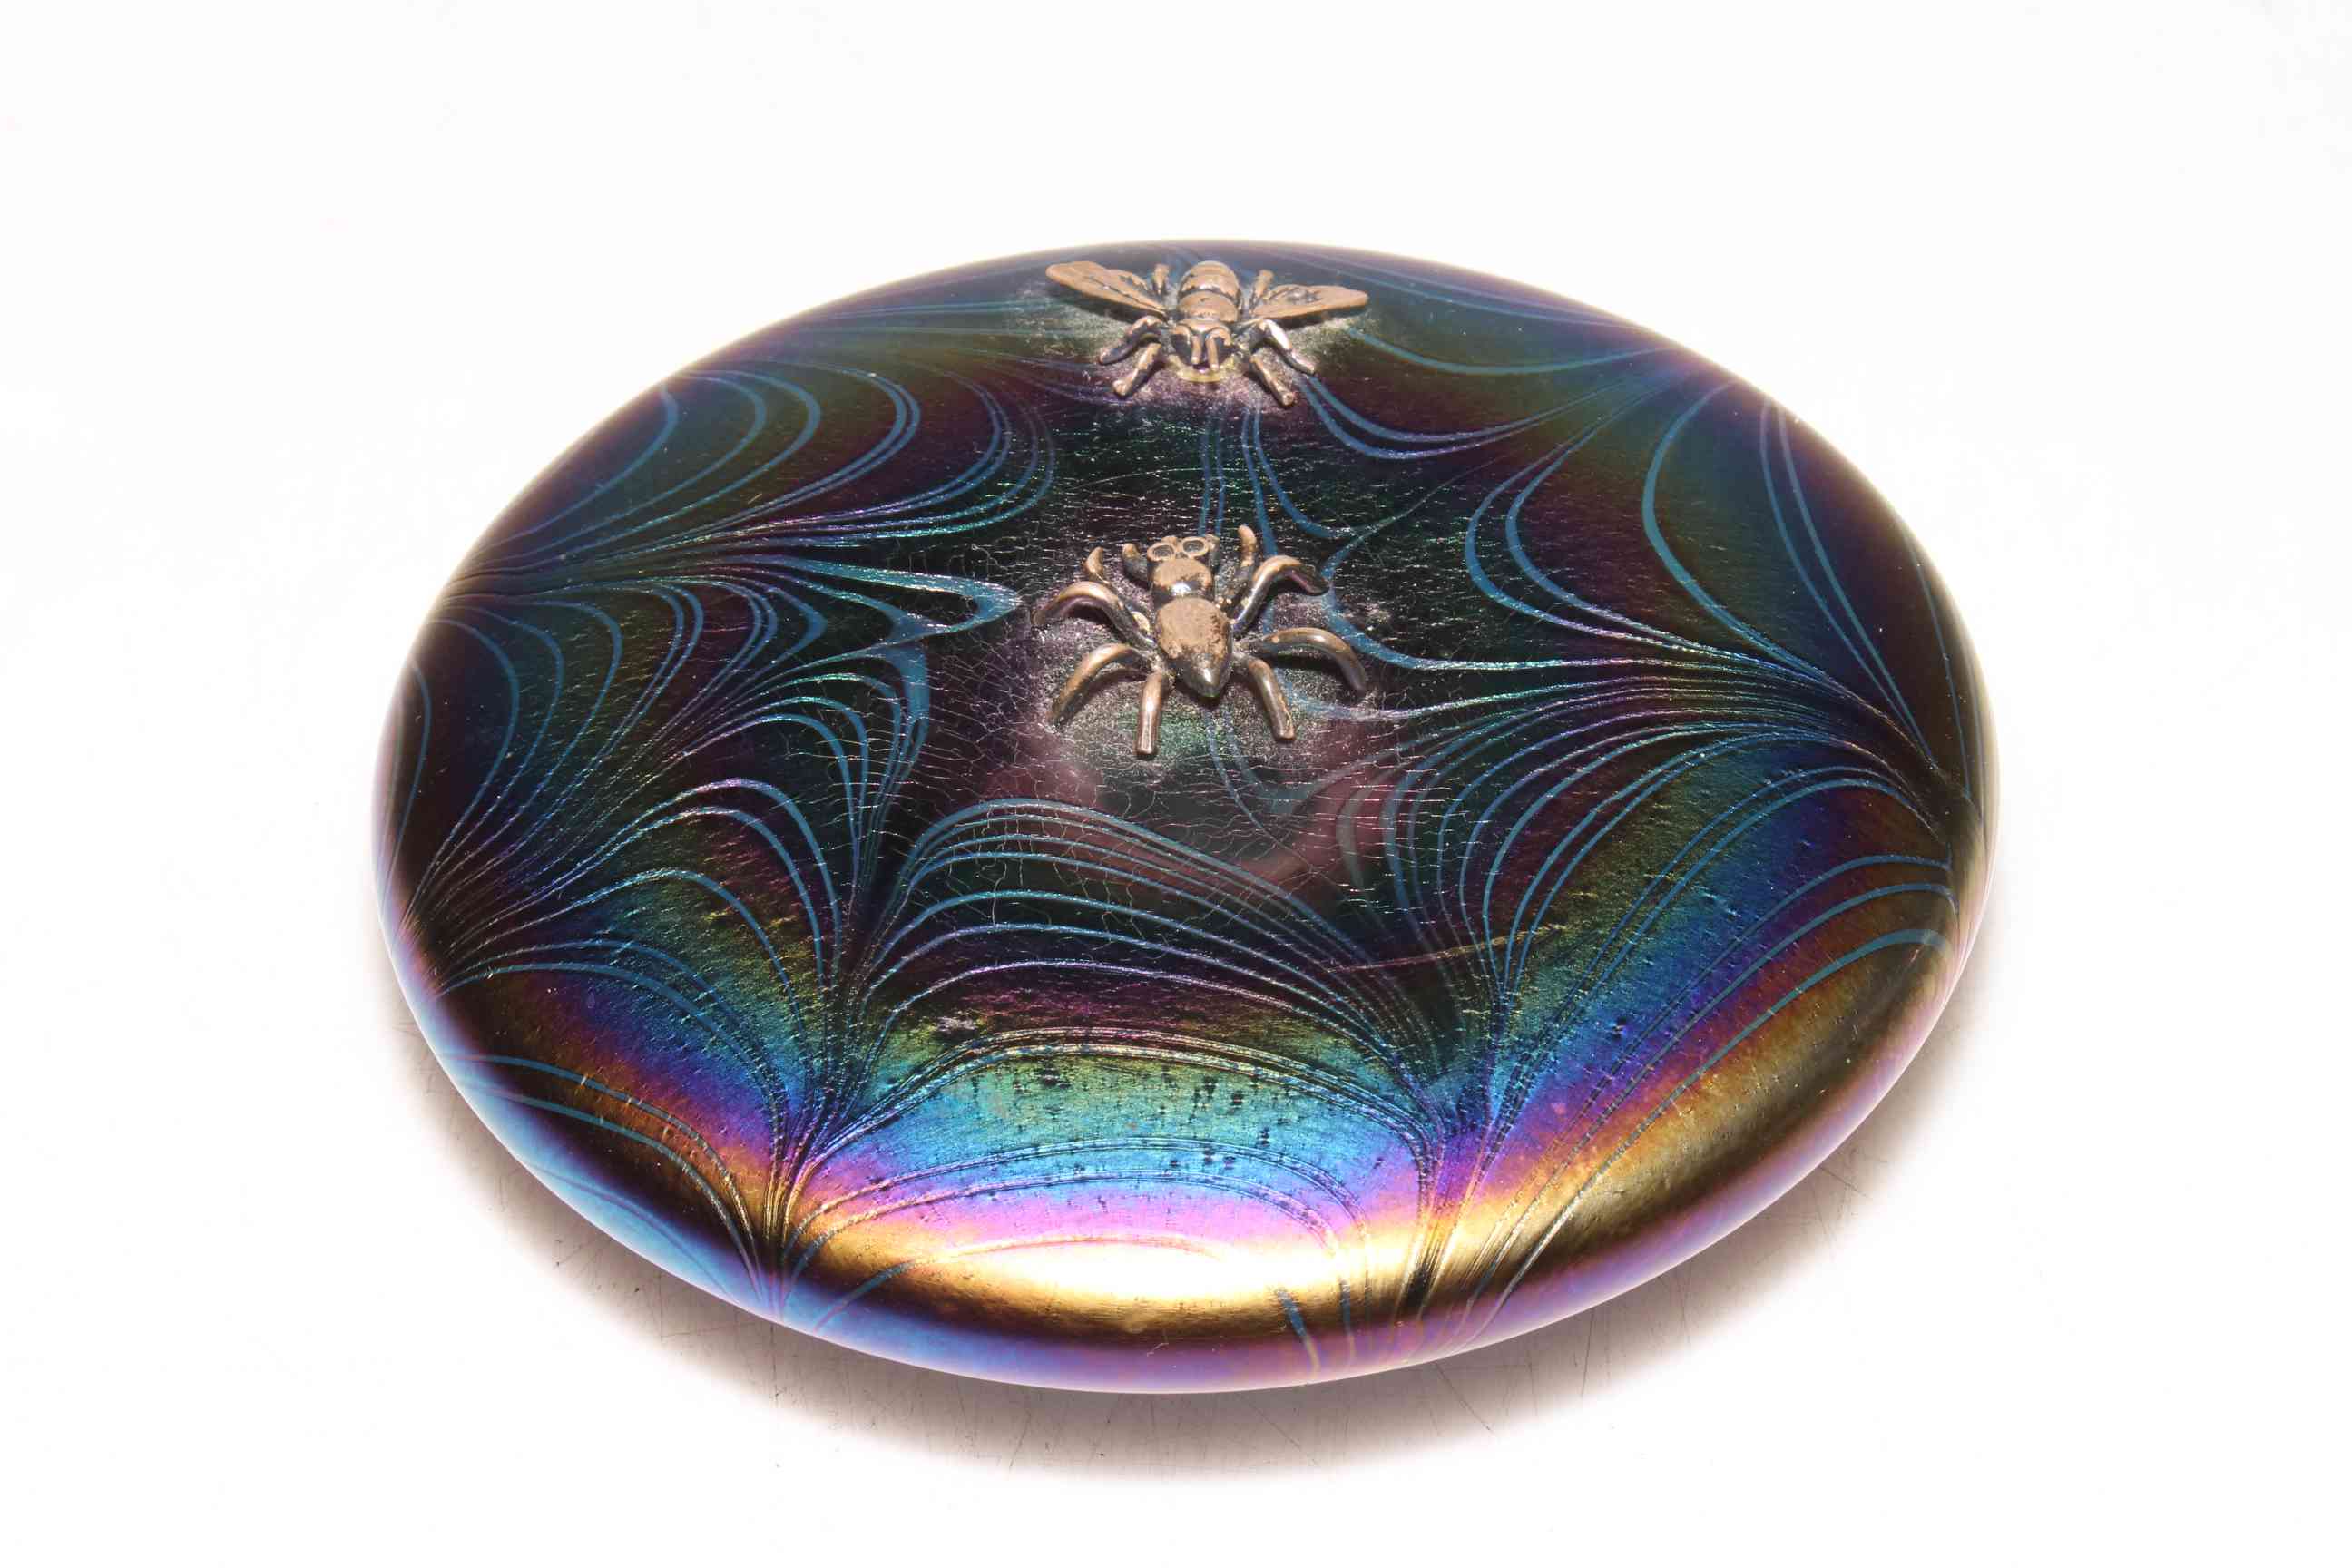 Lazlo Usine-Verre art glass paperweight with bronze spider and fly, 12cm diameter.